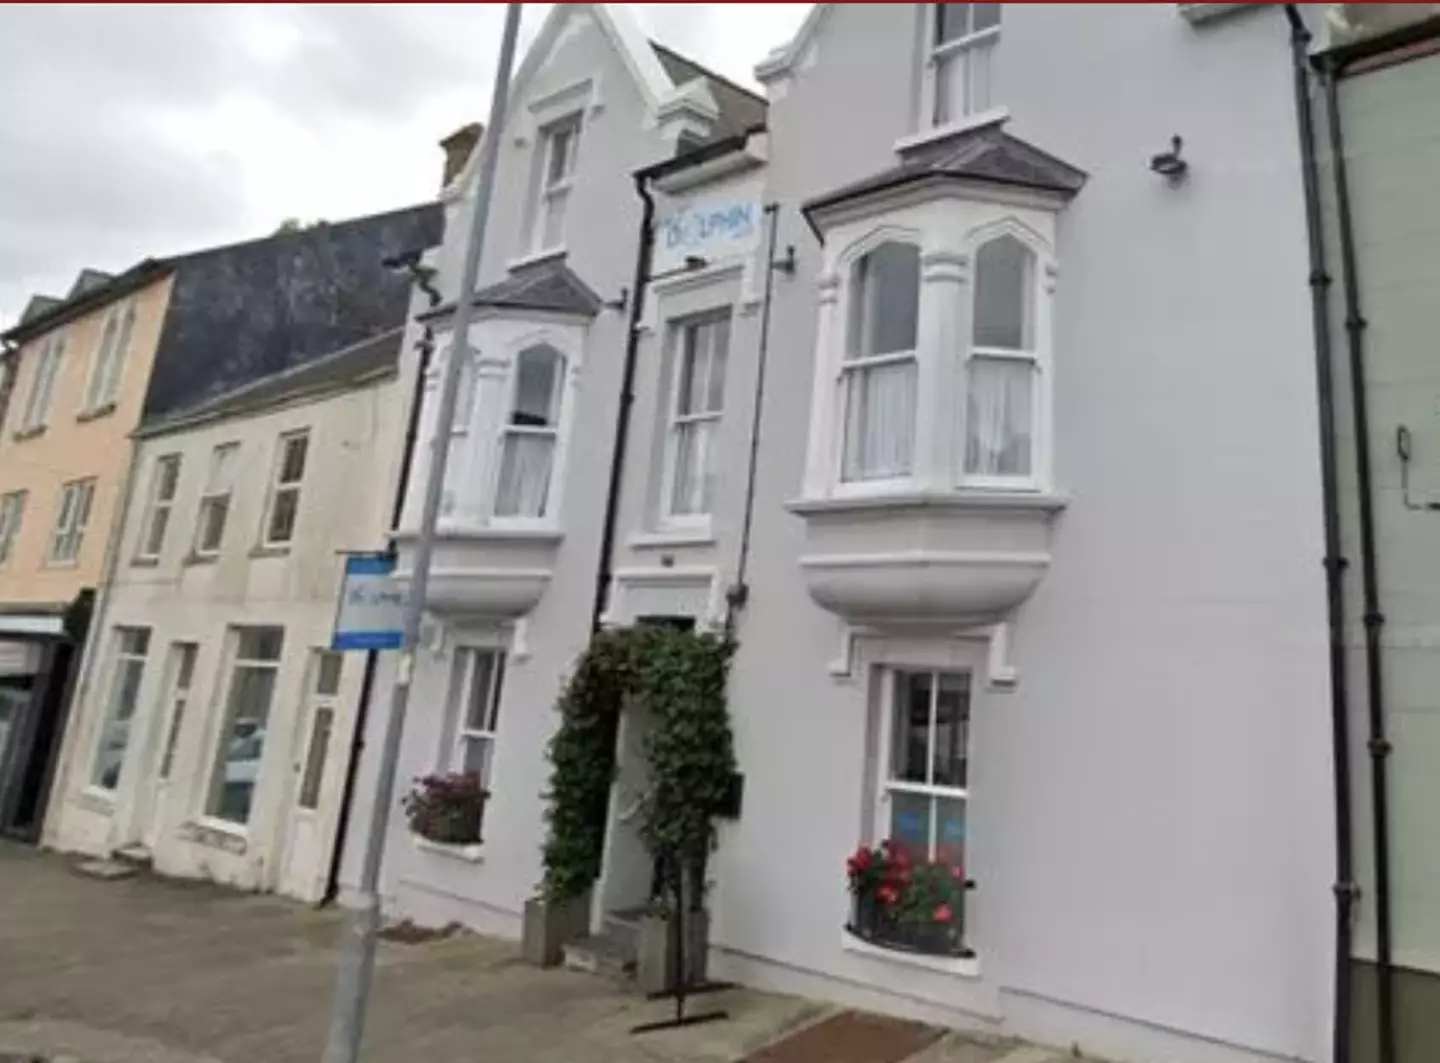 The couple stayed at the Dolphin Hotel in Pembrokeshire.